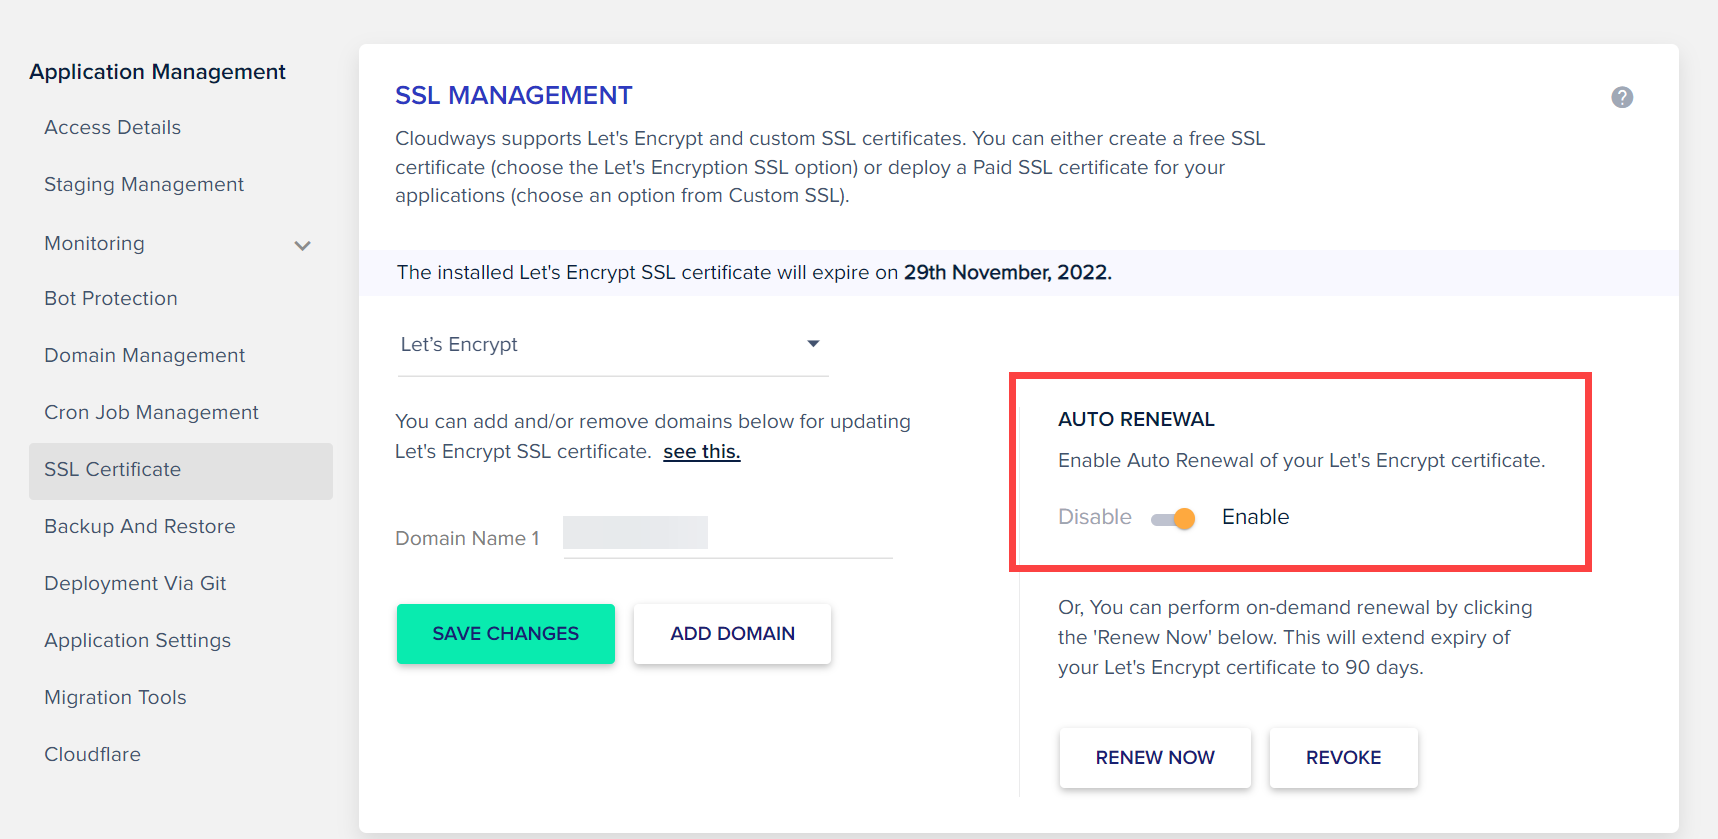 How to add a domain in Cloudways - Auto Renewal